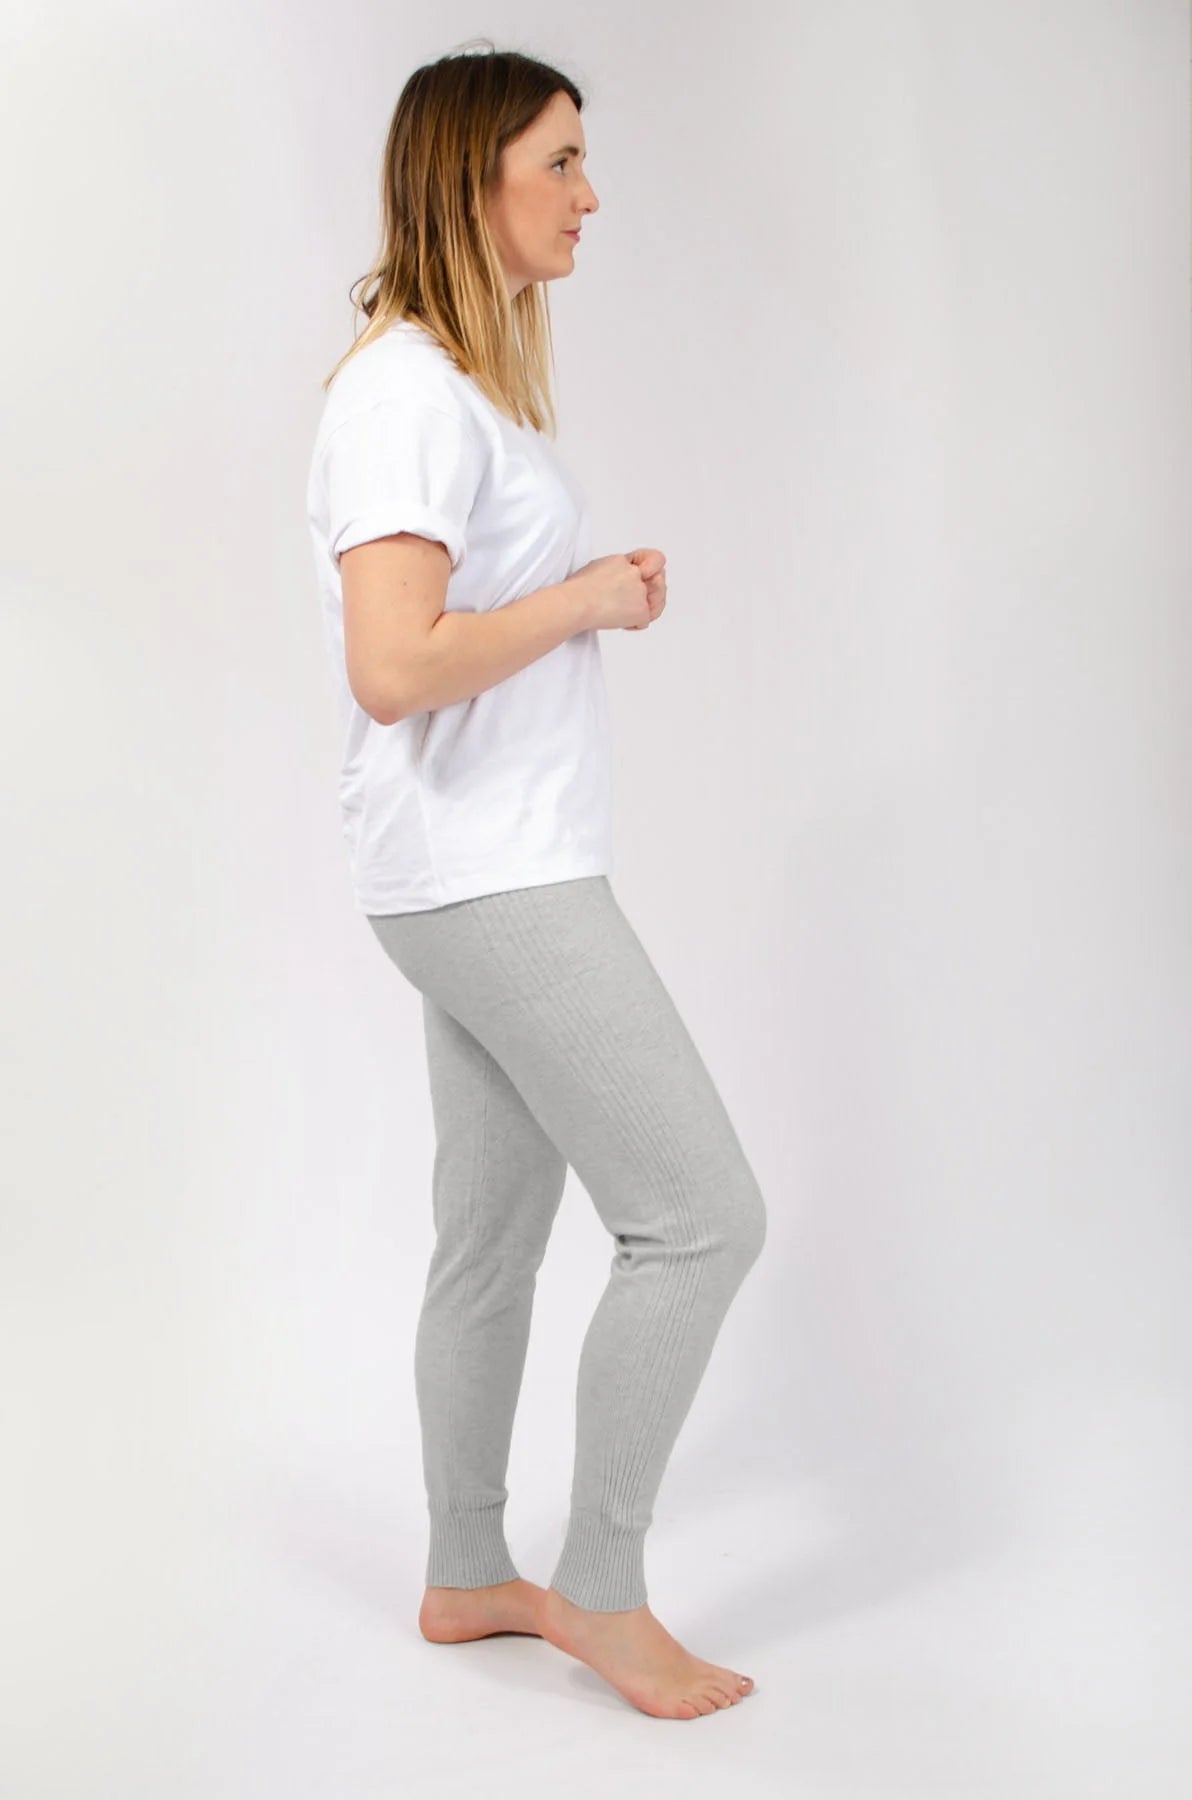 River Island Soft Touch Ribbed Jersey Joggers